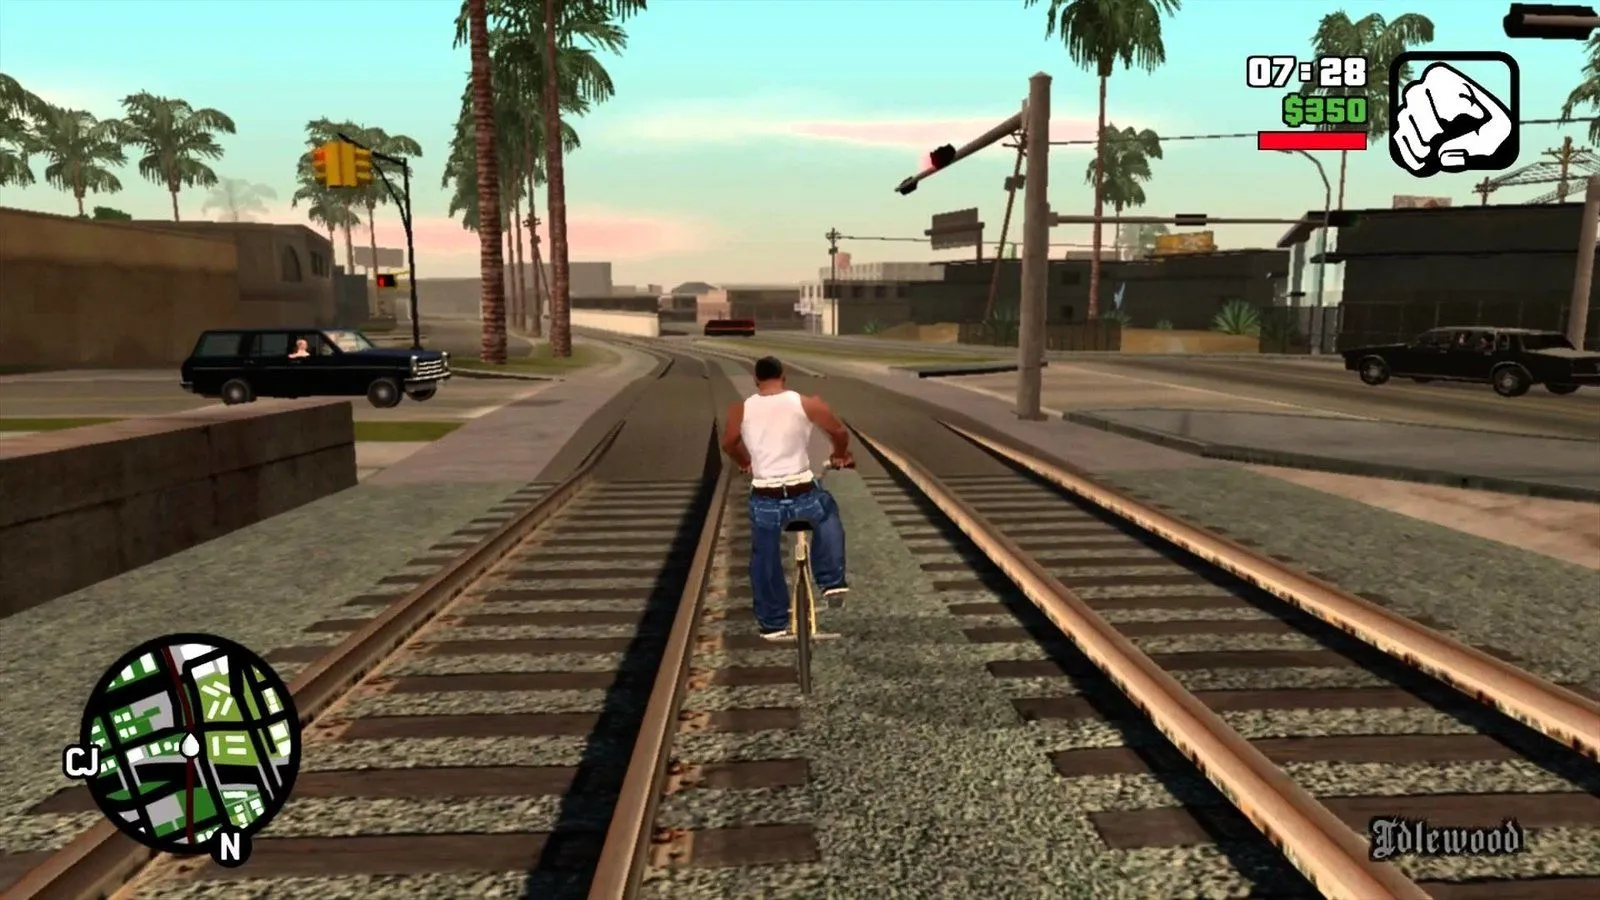 How to download and install GTA San Andreas on Windows, Android, & iOS